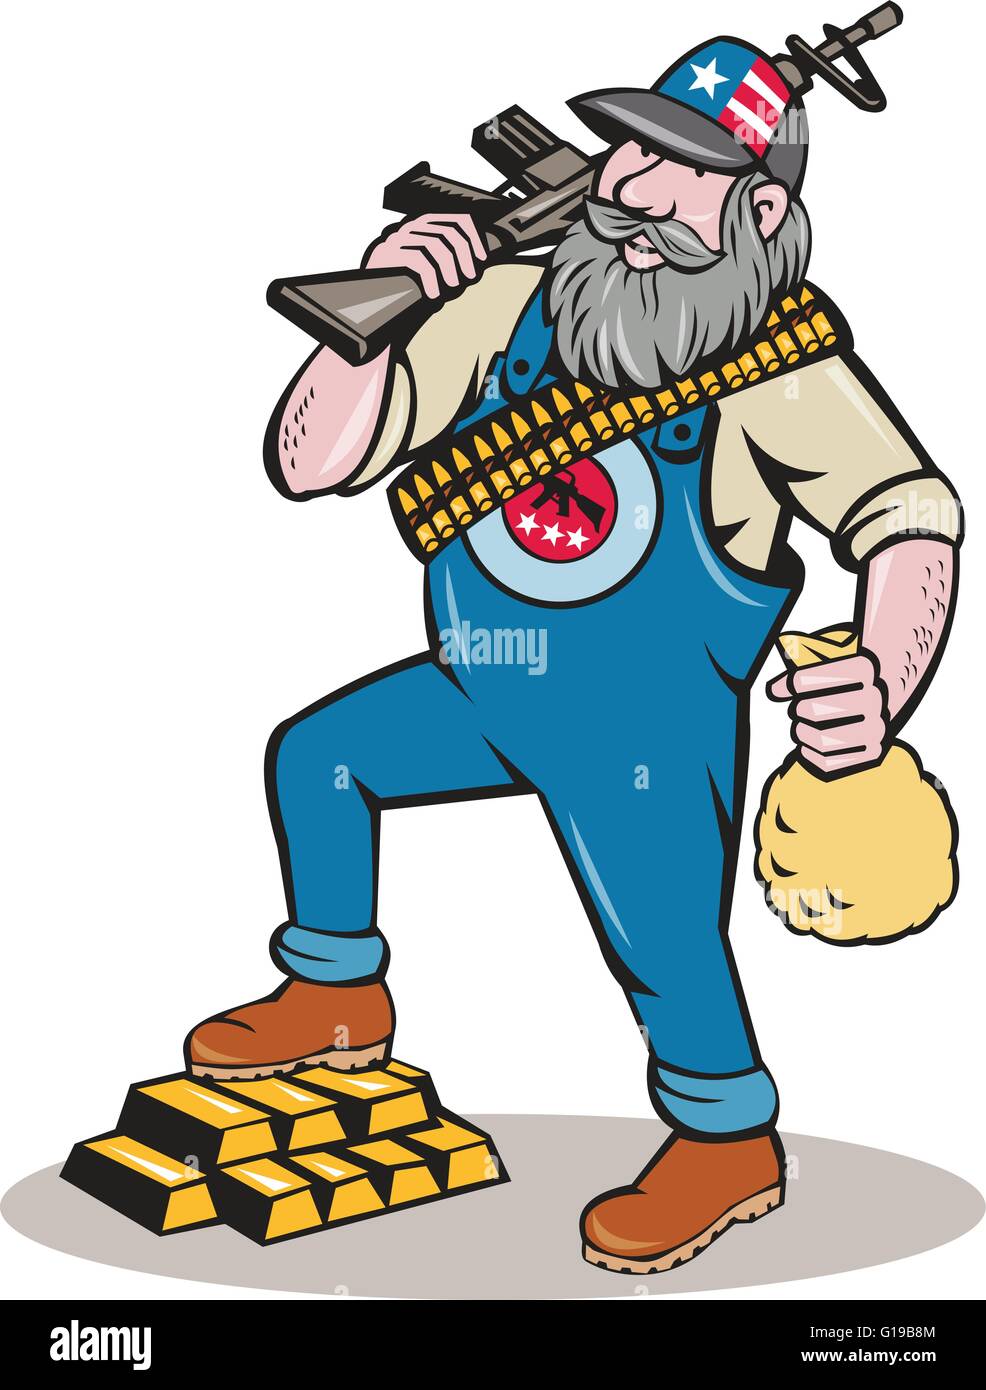 Illustration of a hillbilly man with beard wearing hat with stars and stripes and ammunition worn across the body holding rifle Stock Vector